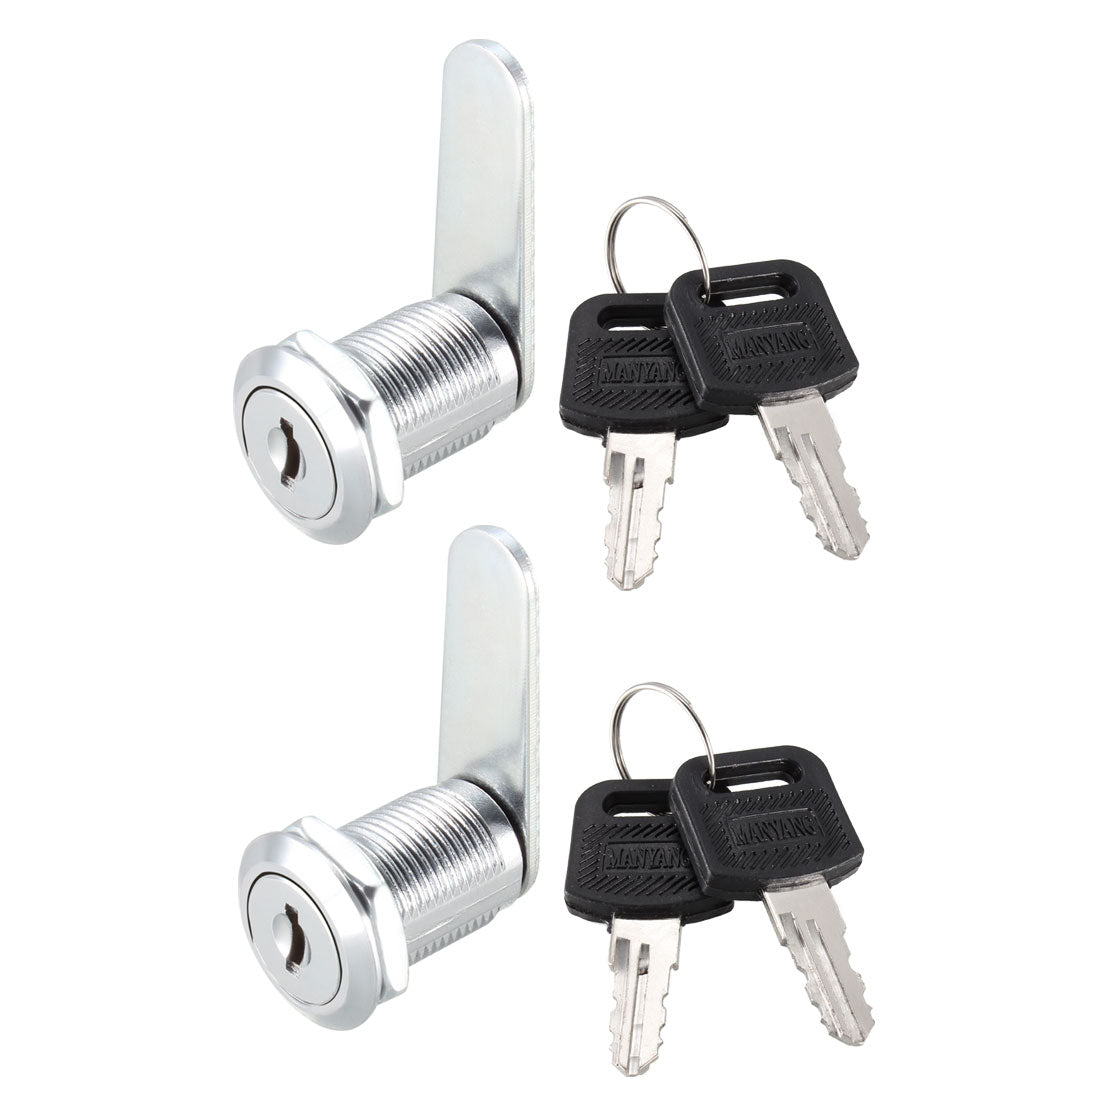 uxcell Uxcell Cam Lock 25mm Cylinder Length Fits Max 5/8-inch Panel Keyed Different 2Pcs